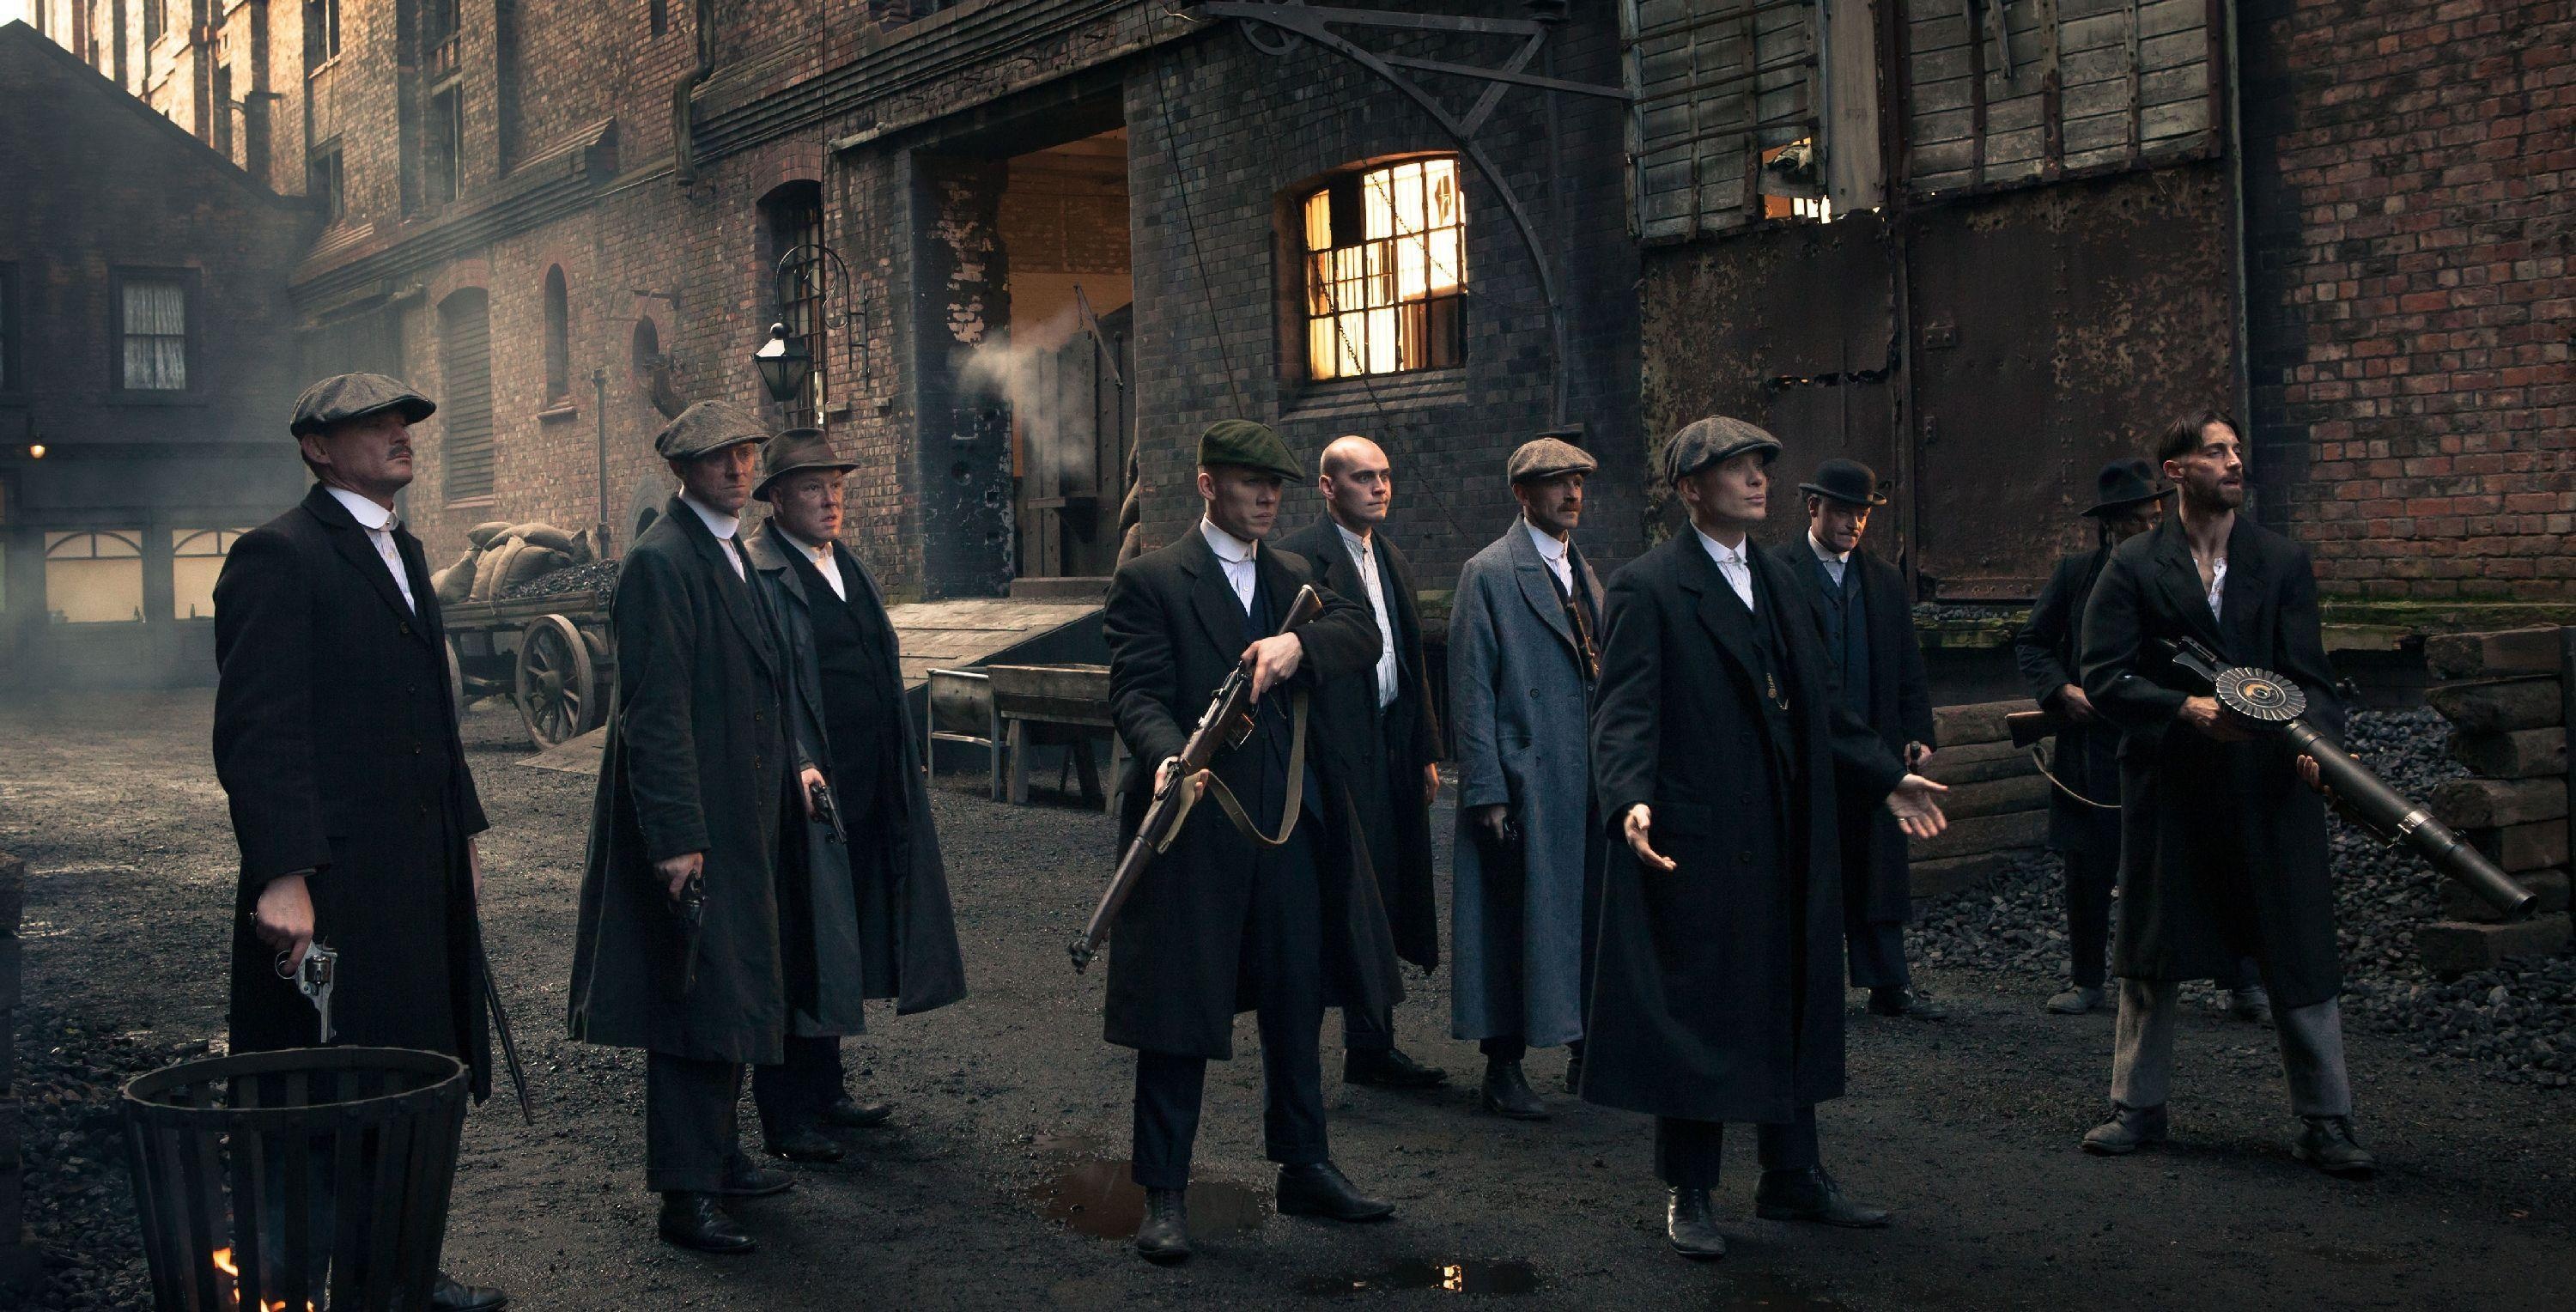 Shelby Family, Peaky Blinders dual monitor wallpapers, Desktop backgrounds, Crime drama, 3000x1530 HD Desktop